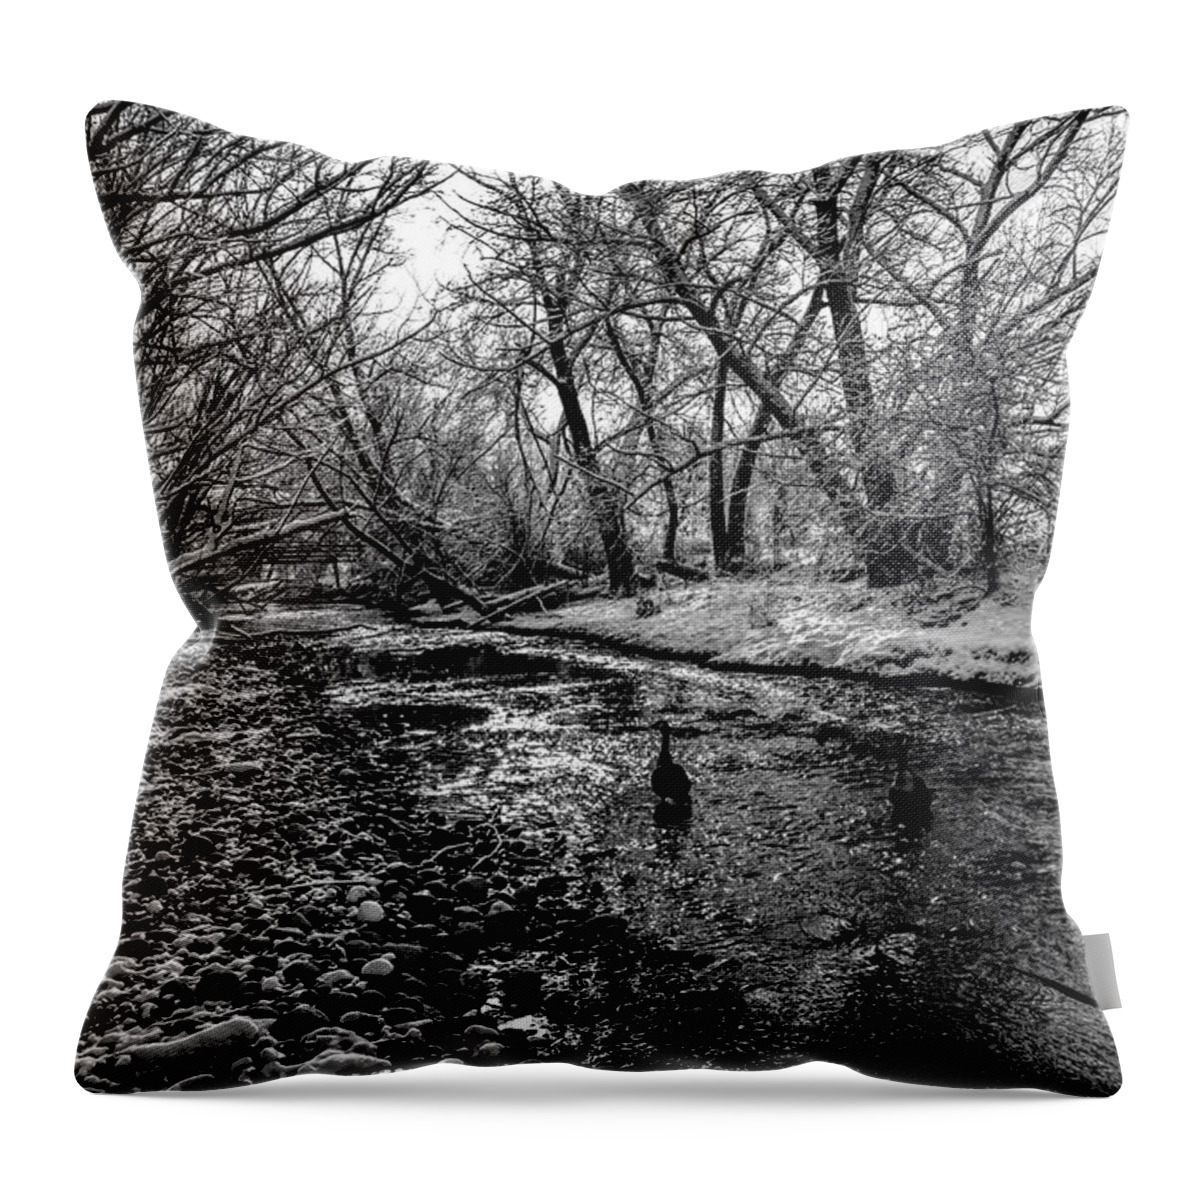 Black And White Throw Pillow featuring the photograph Goose Creek by Michael Brungardt